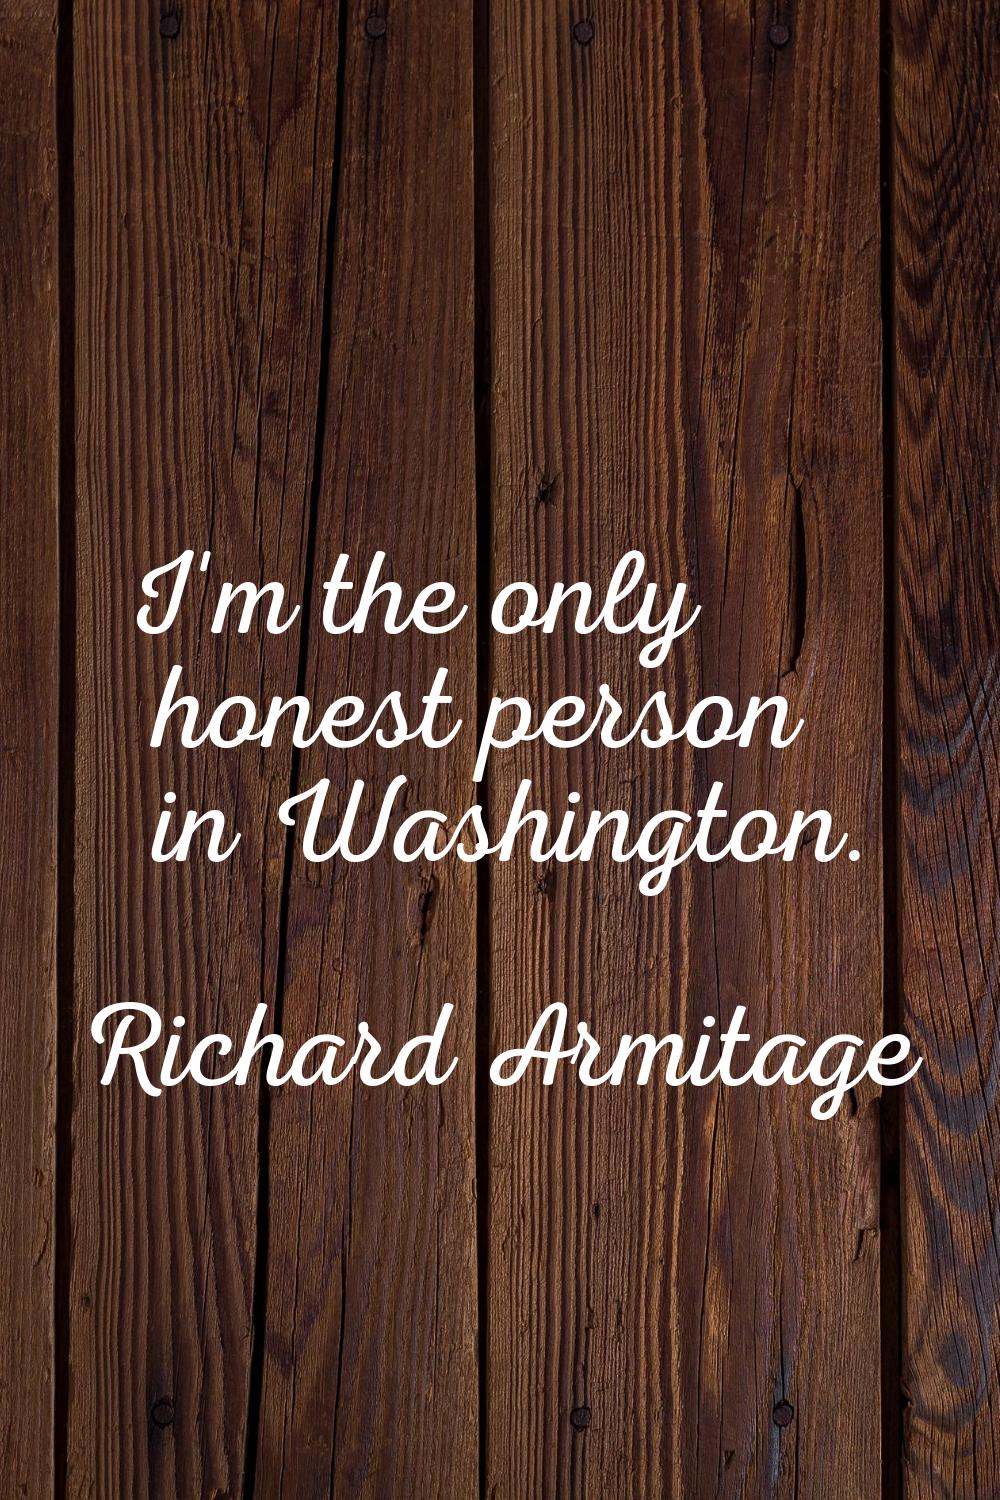 I'm the only honest person in Washington.